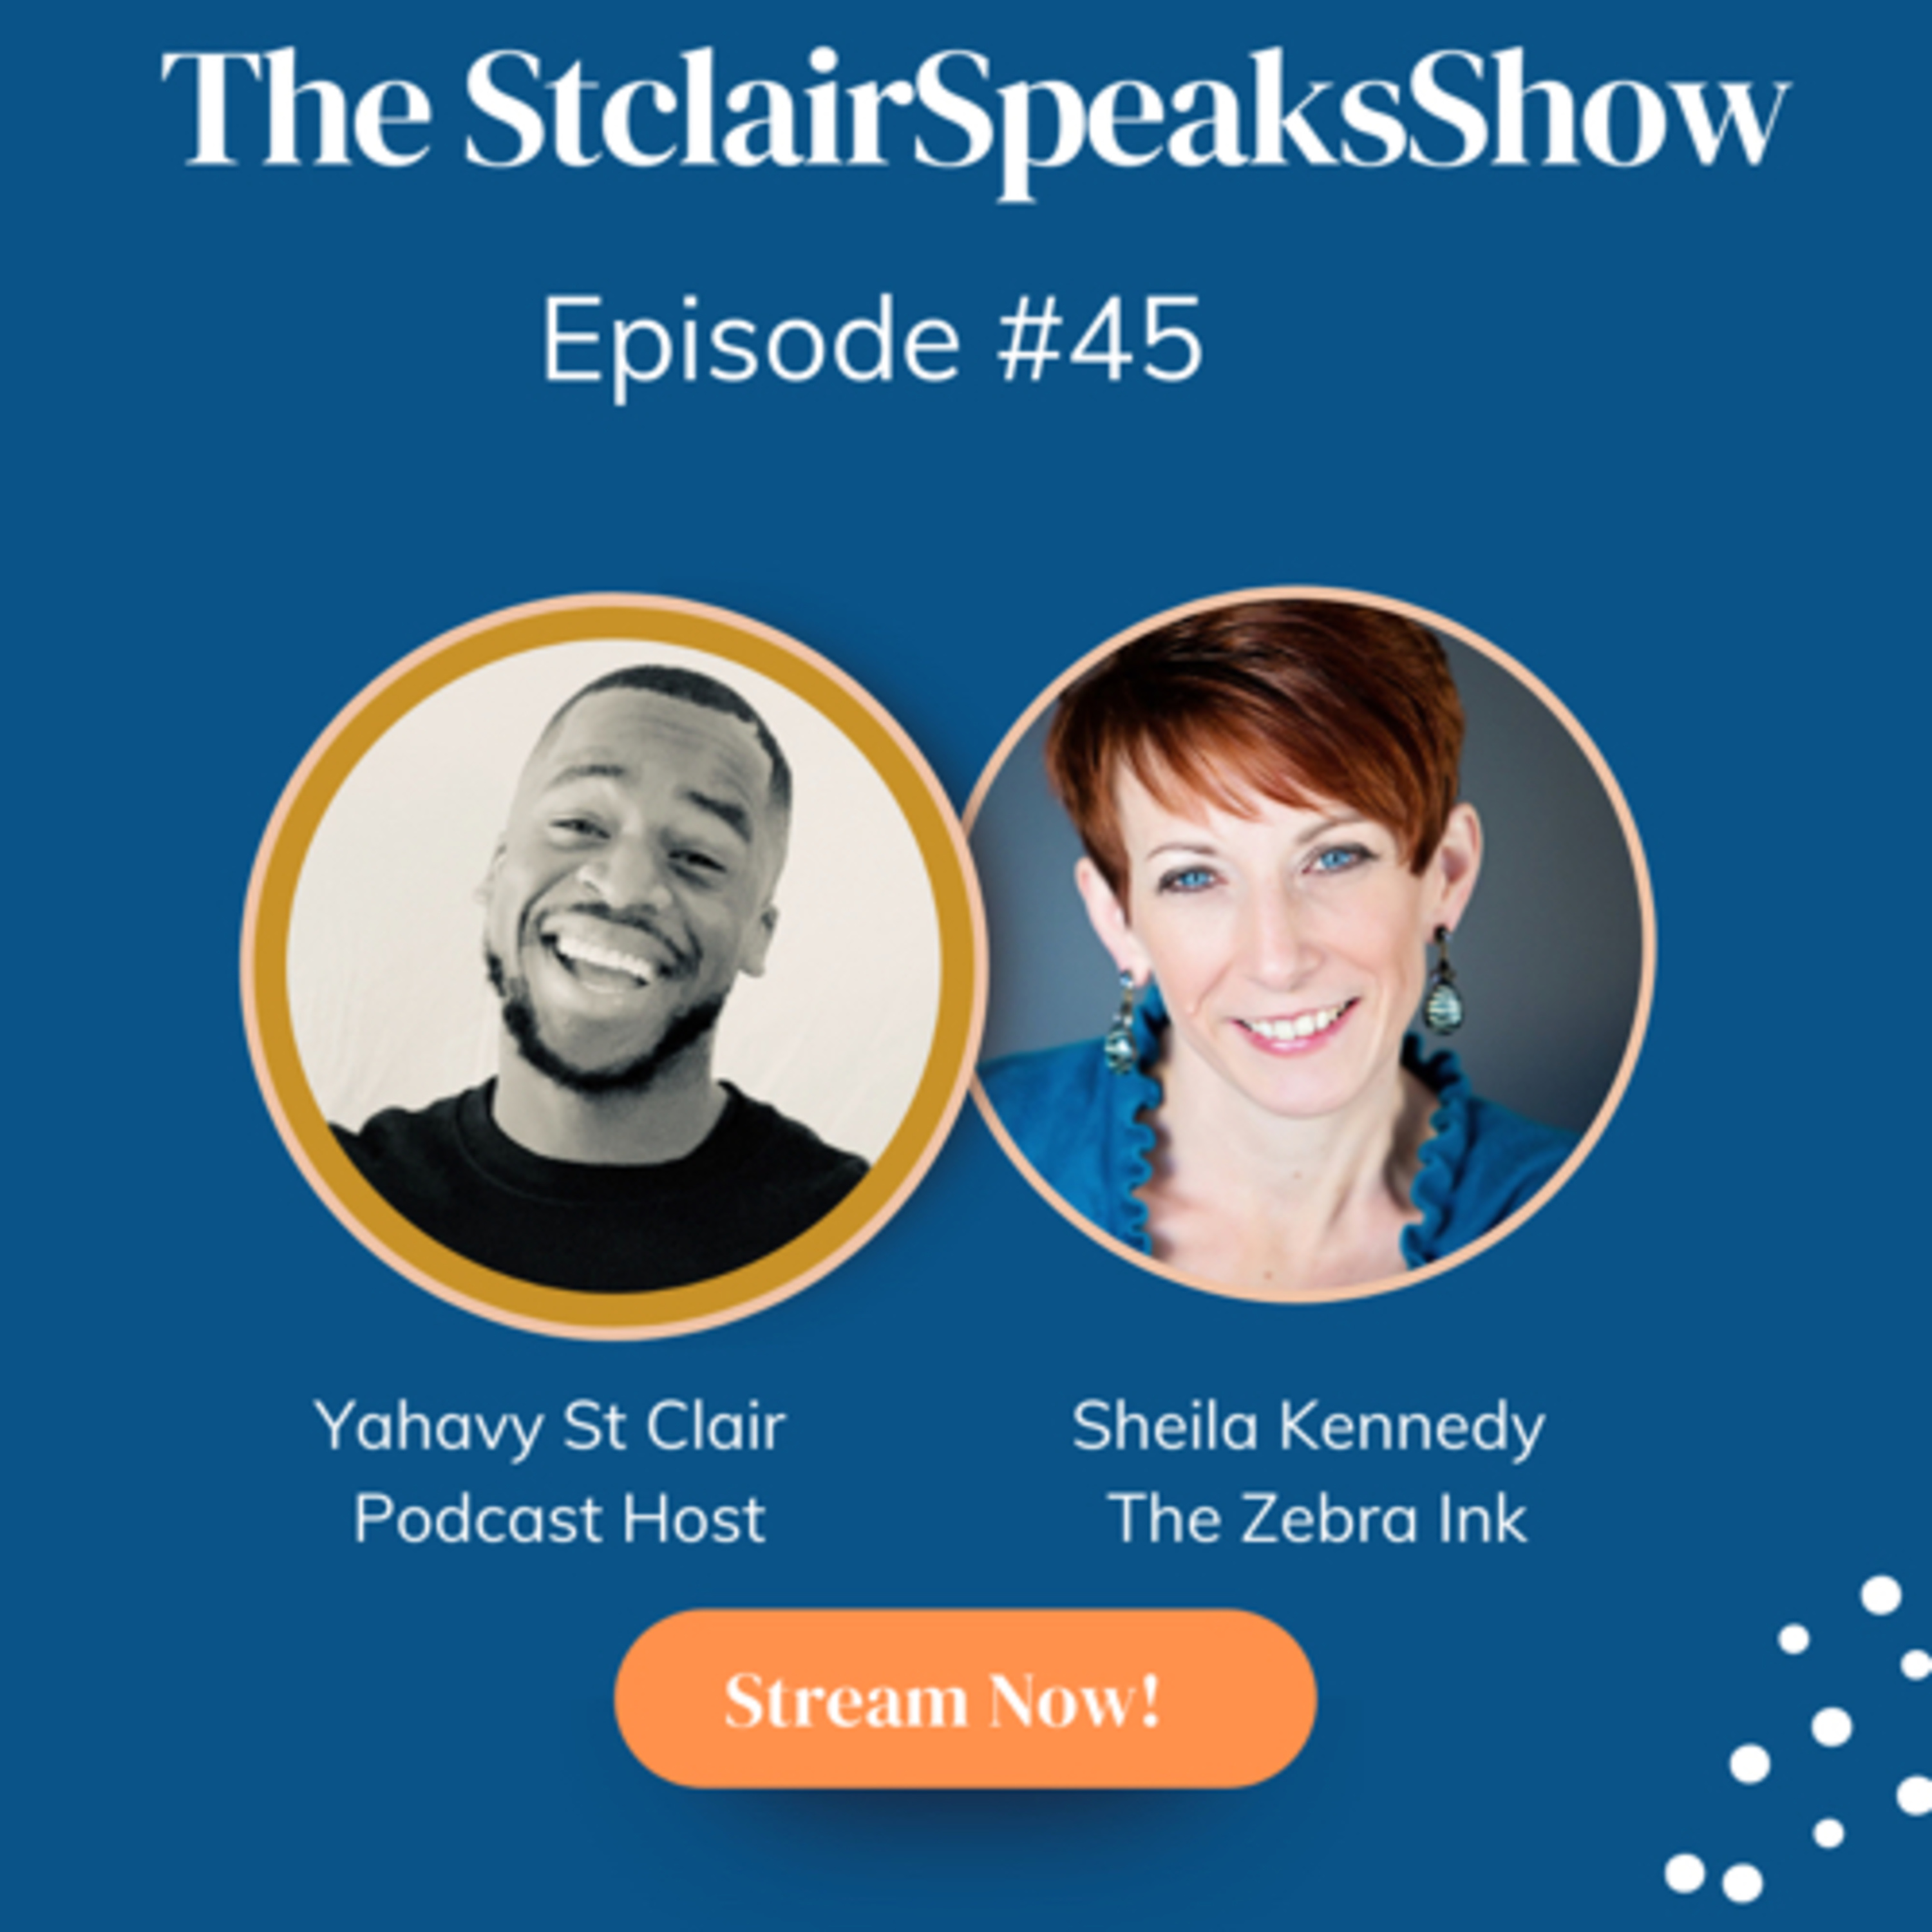 The StclairSpeaksShow Podcast Featuring Sheila Kennedy Author and Independent Publishing Strategist at The Zebra Ink Episode #45 Image